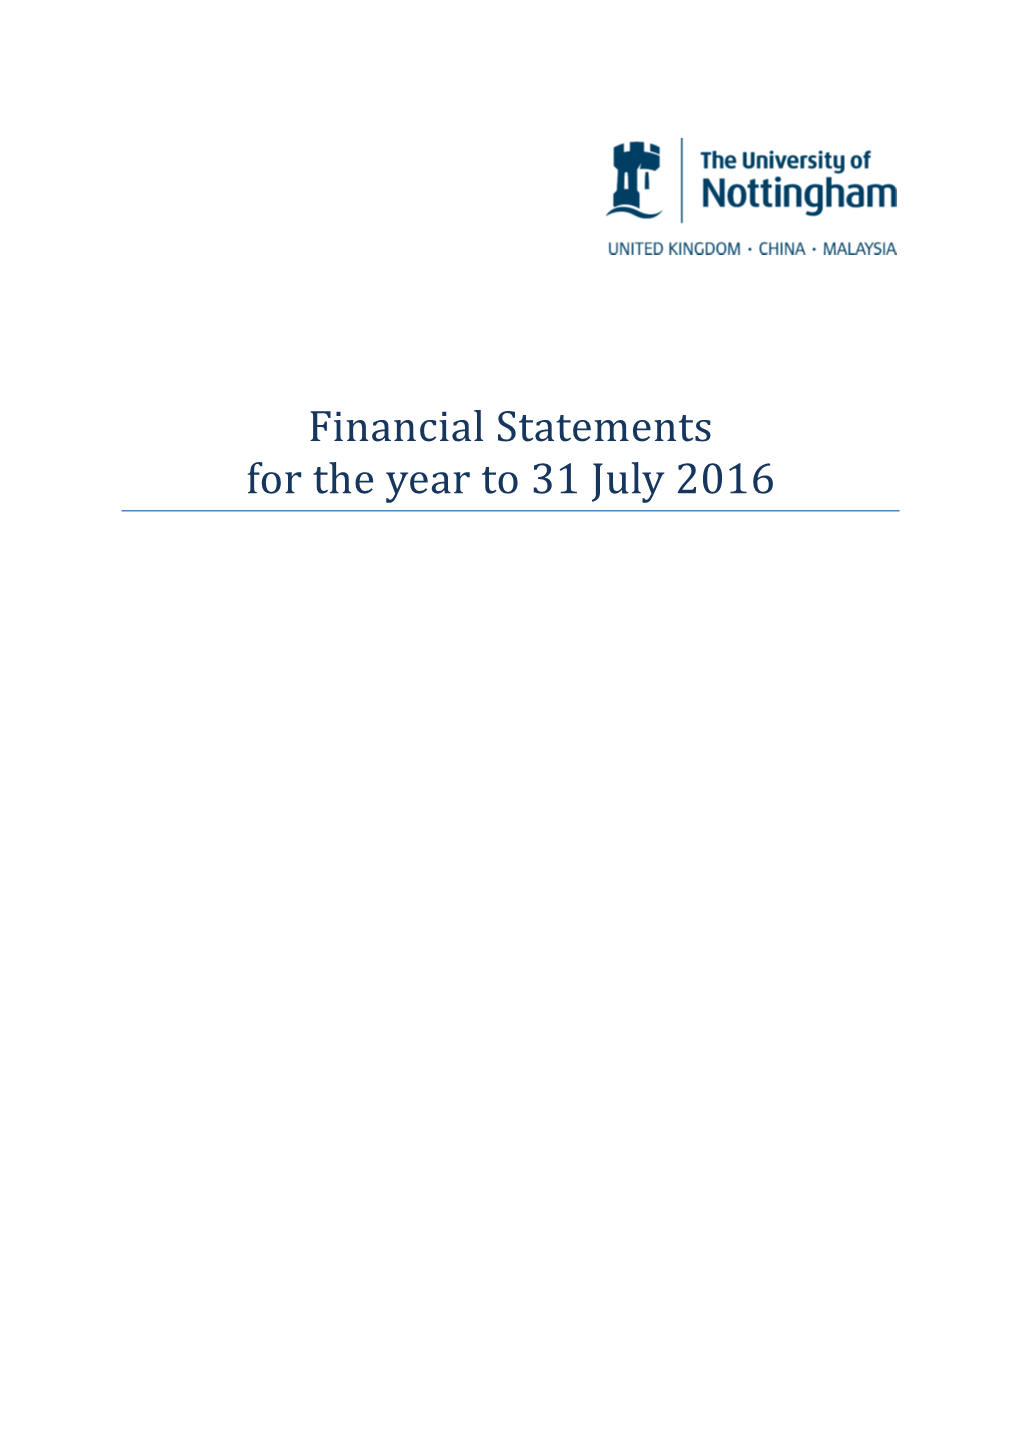 Financial Statements for the Year to 31 July 2016